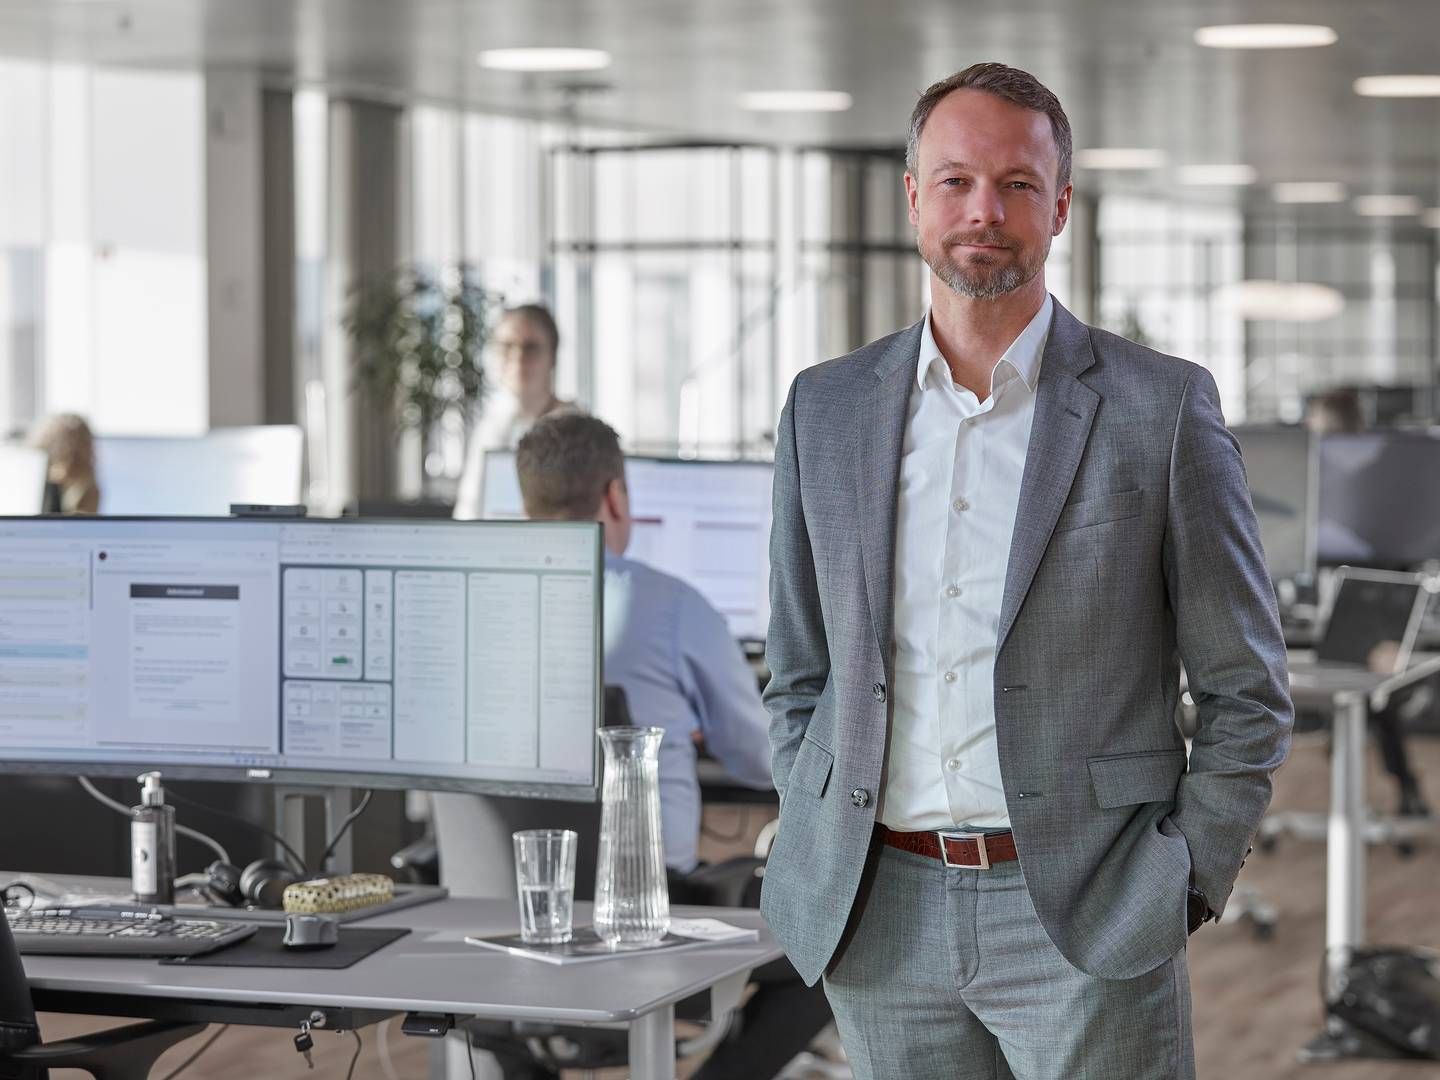 Peter Kjærgaard assumed position as CEO of Formuepleje on January 1 this year. He came from. He transferred from a previous position as head of wealth management at Nykredit. | Photo: Pr / Formuepleje